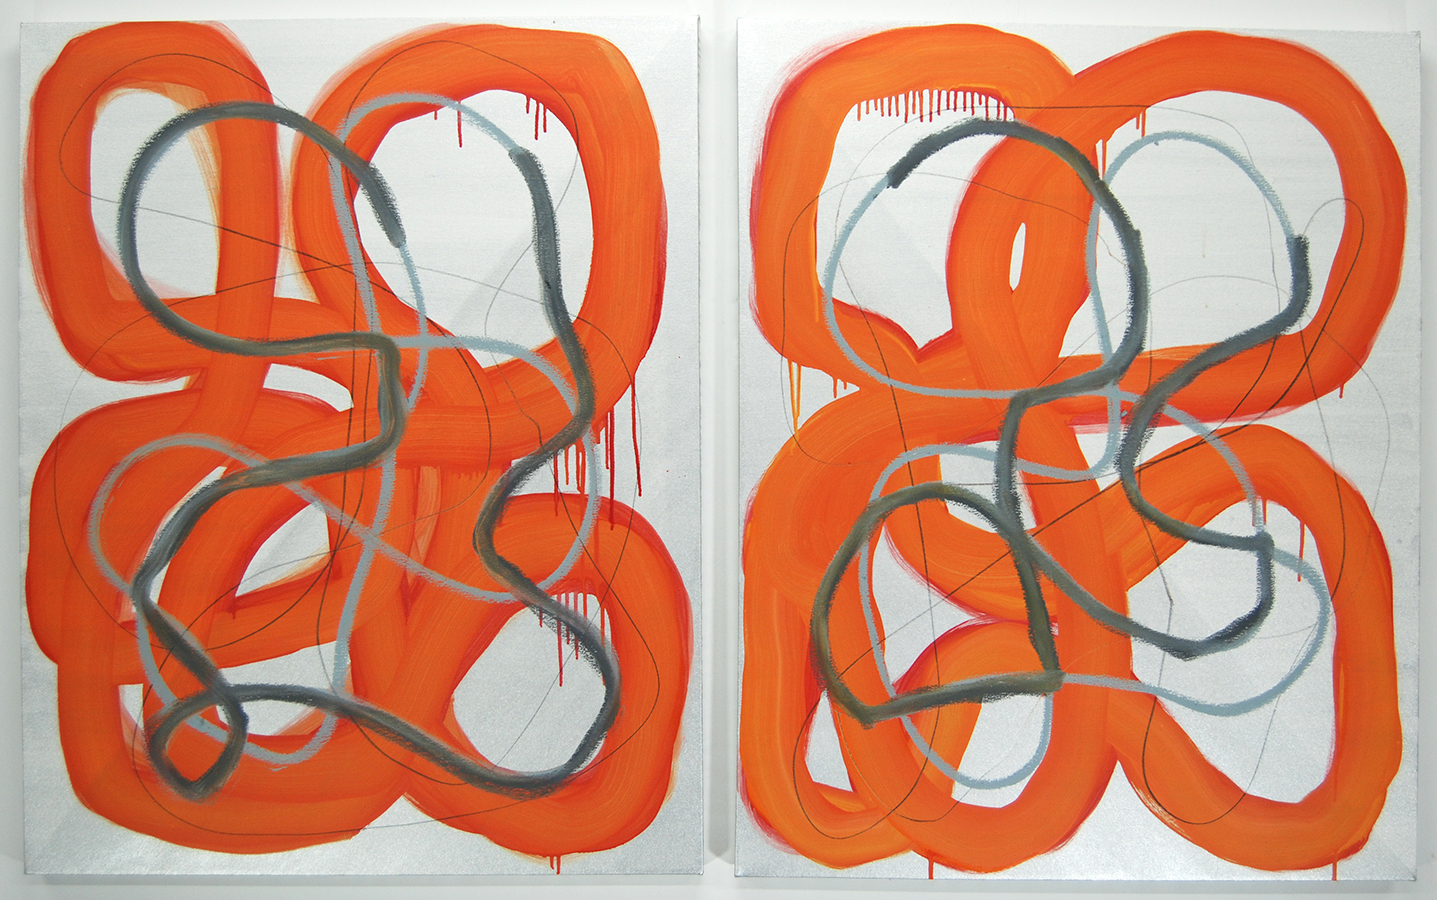  "Electrolytes", diptych, 2015, oil and graphite on linen, 40 x 32 inches 